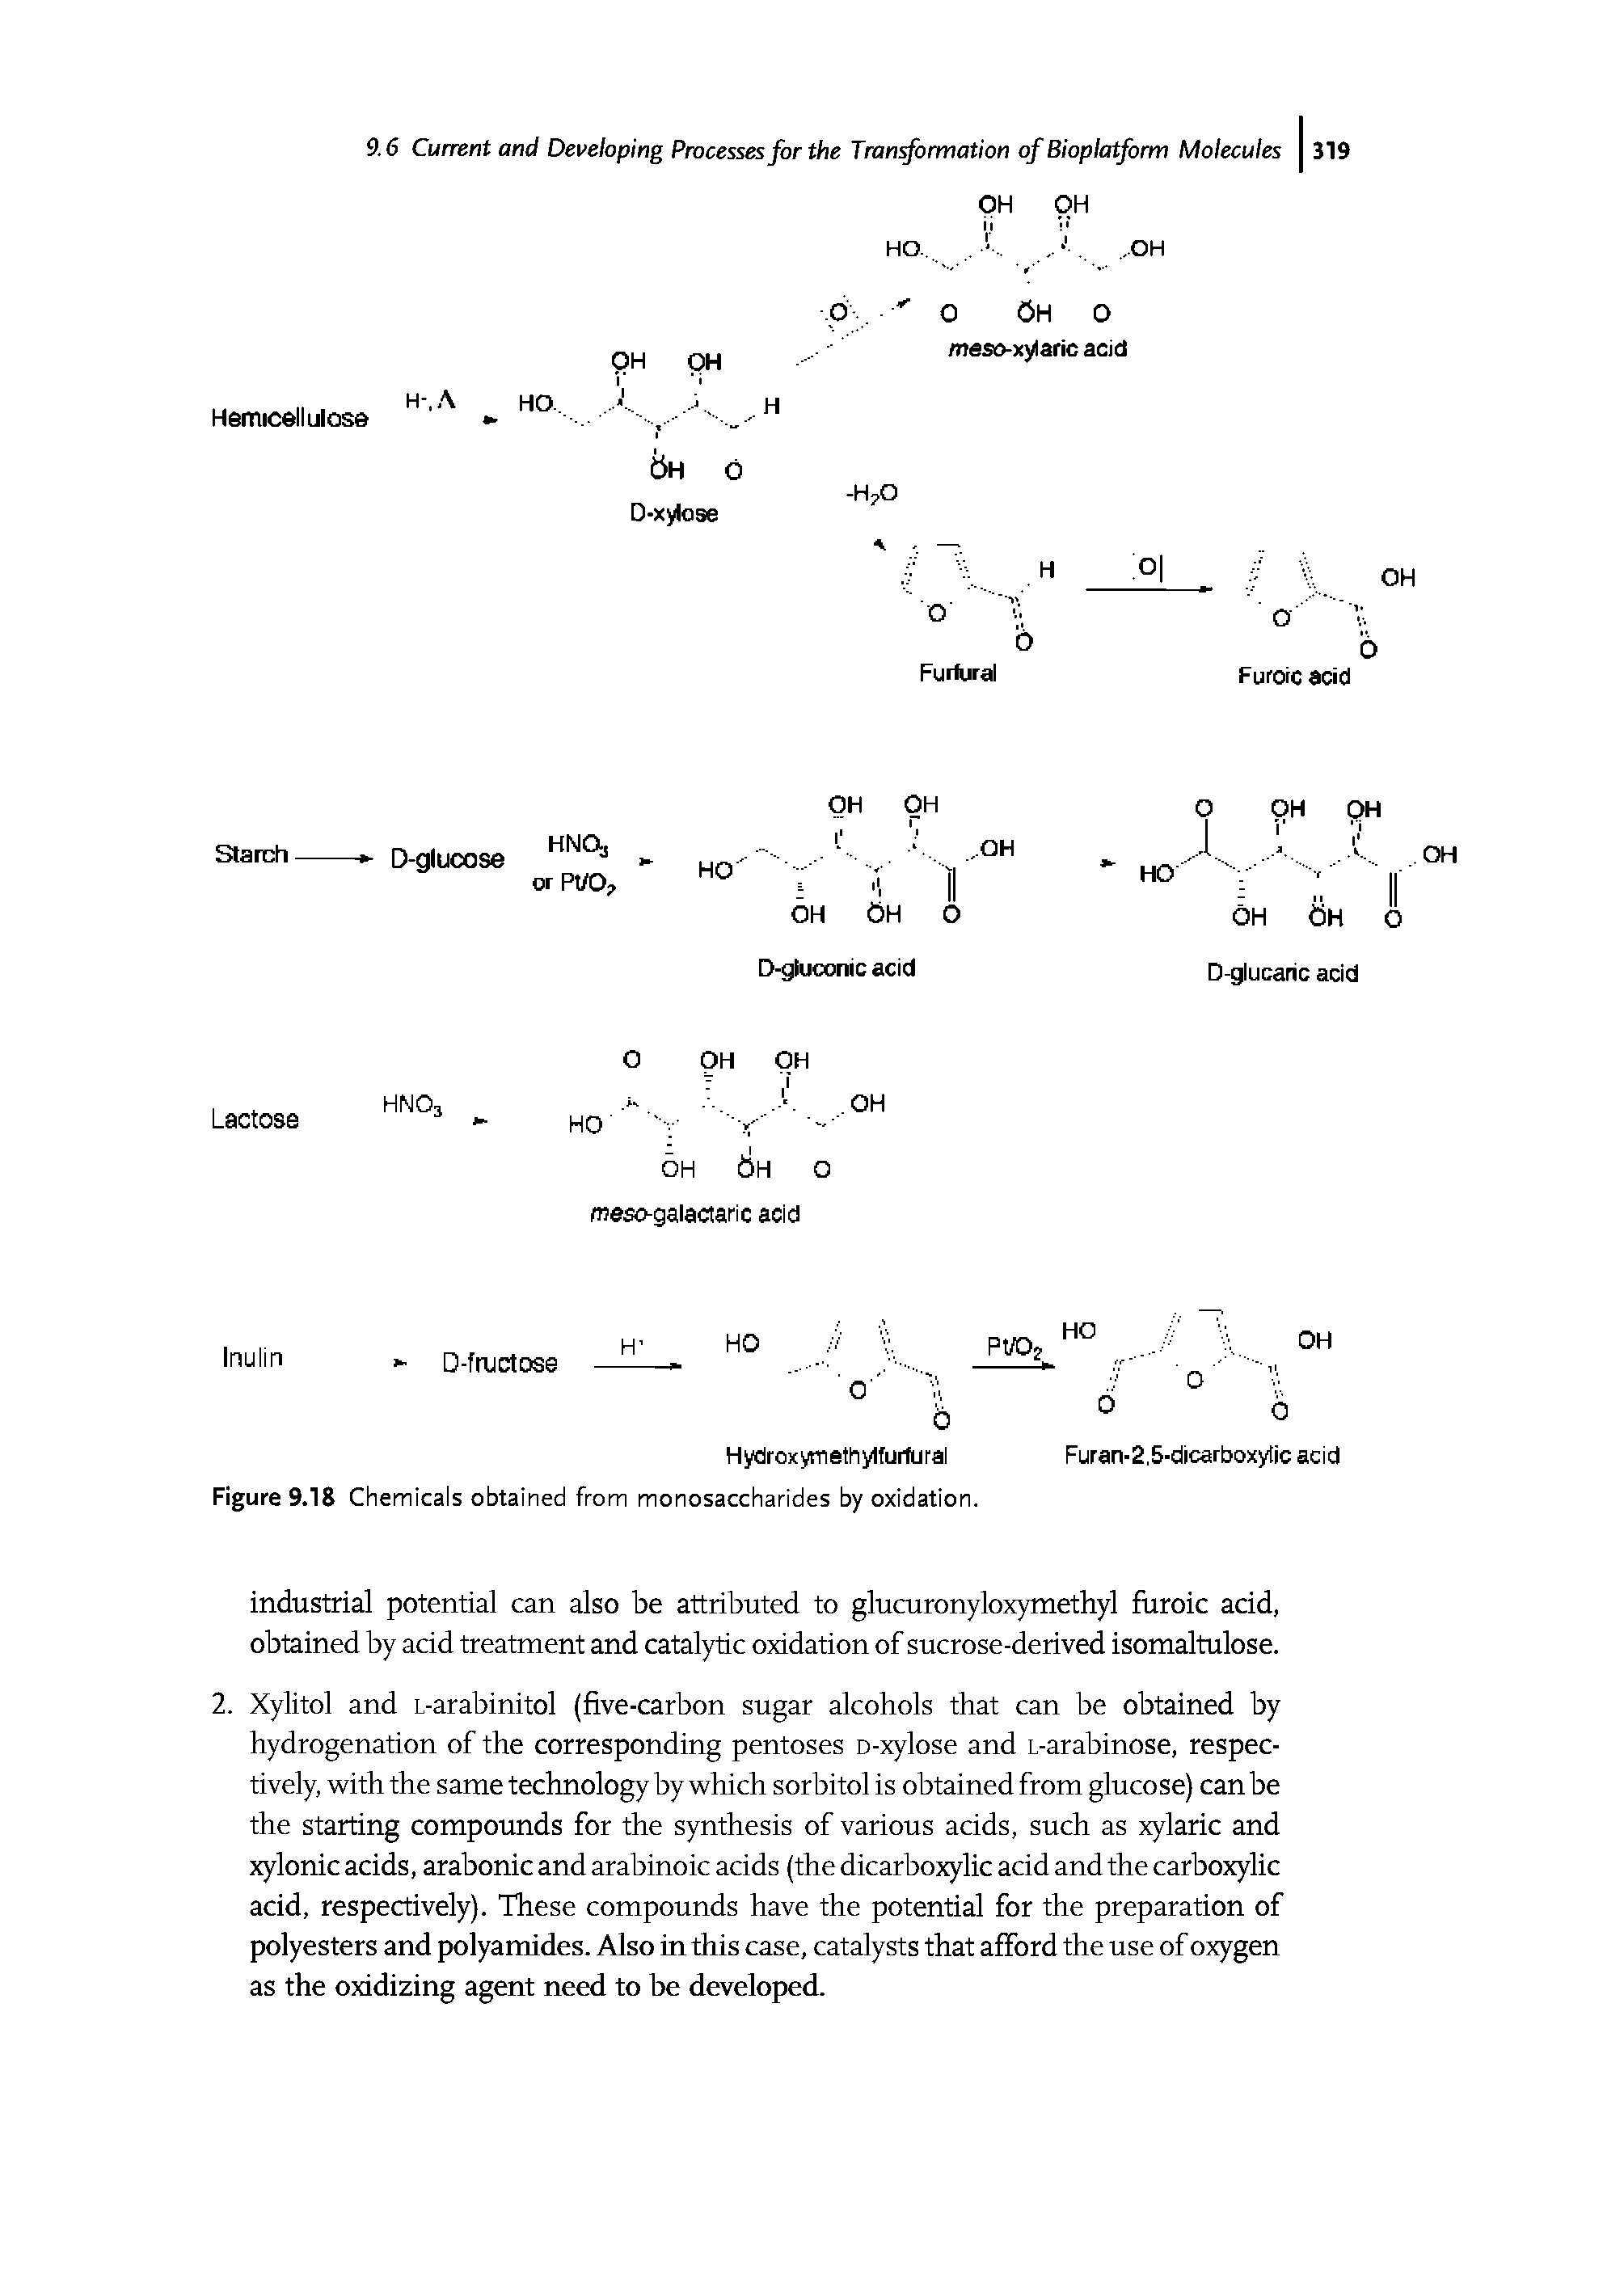 Figure 9.18 Chemicals obtained from monosaccharides by oxidation.